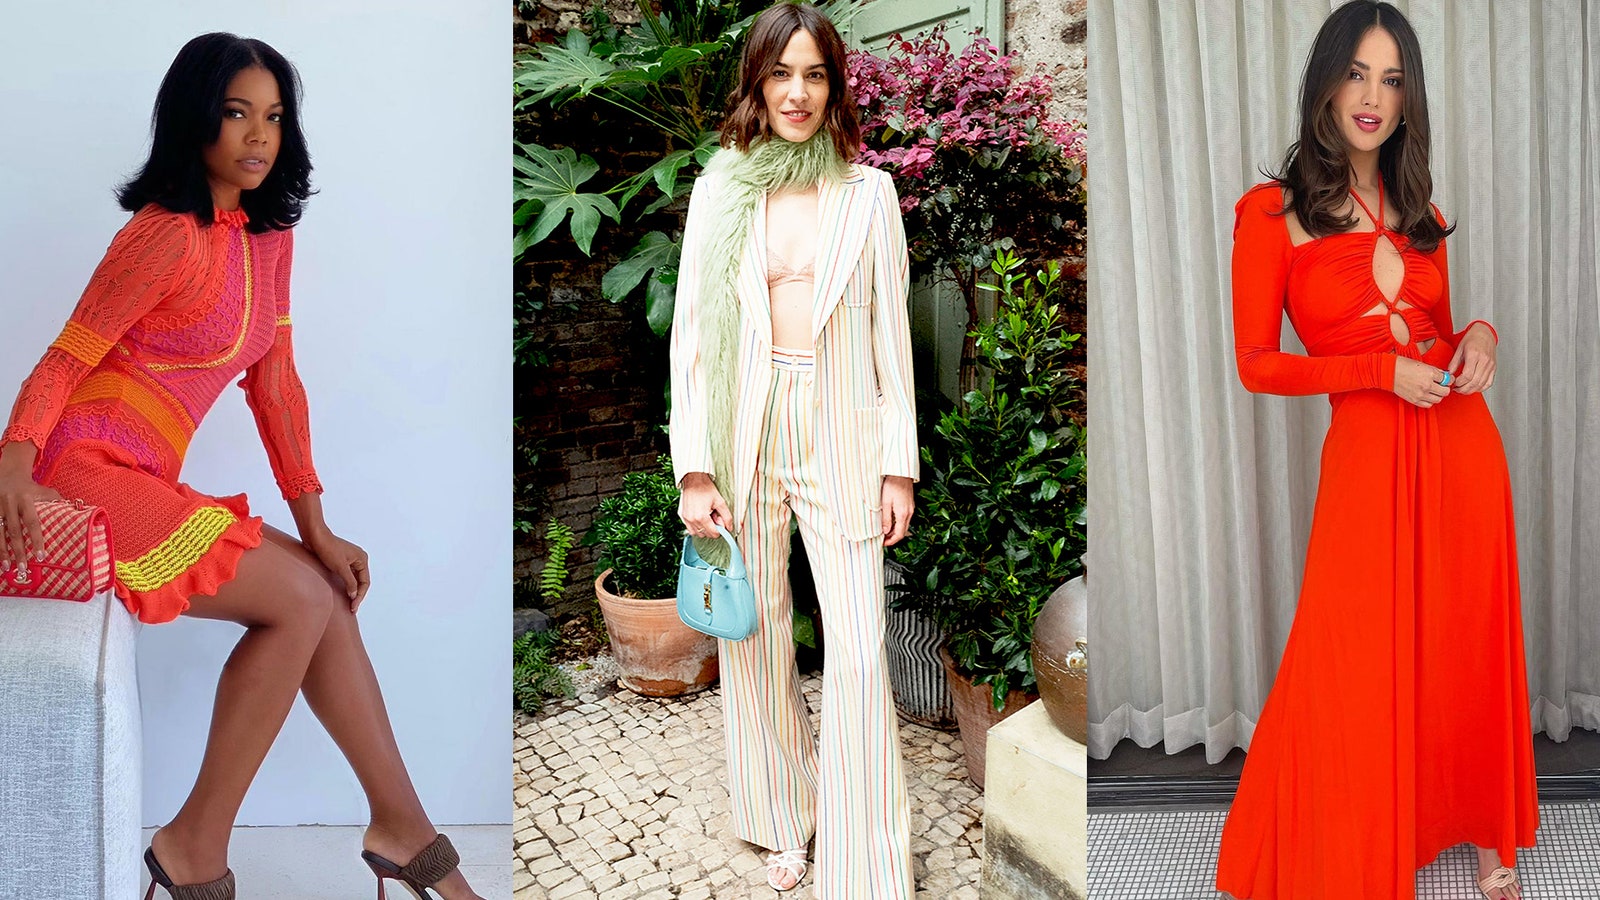 This Week, the Best Dressed Stars Gave Us a Preview of Summer Style